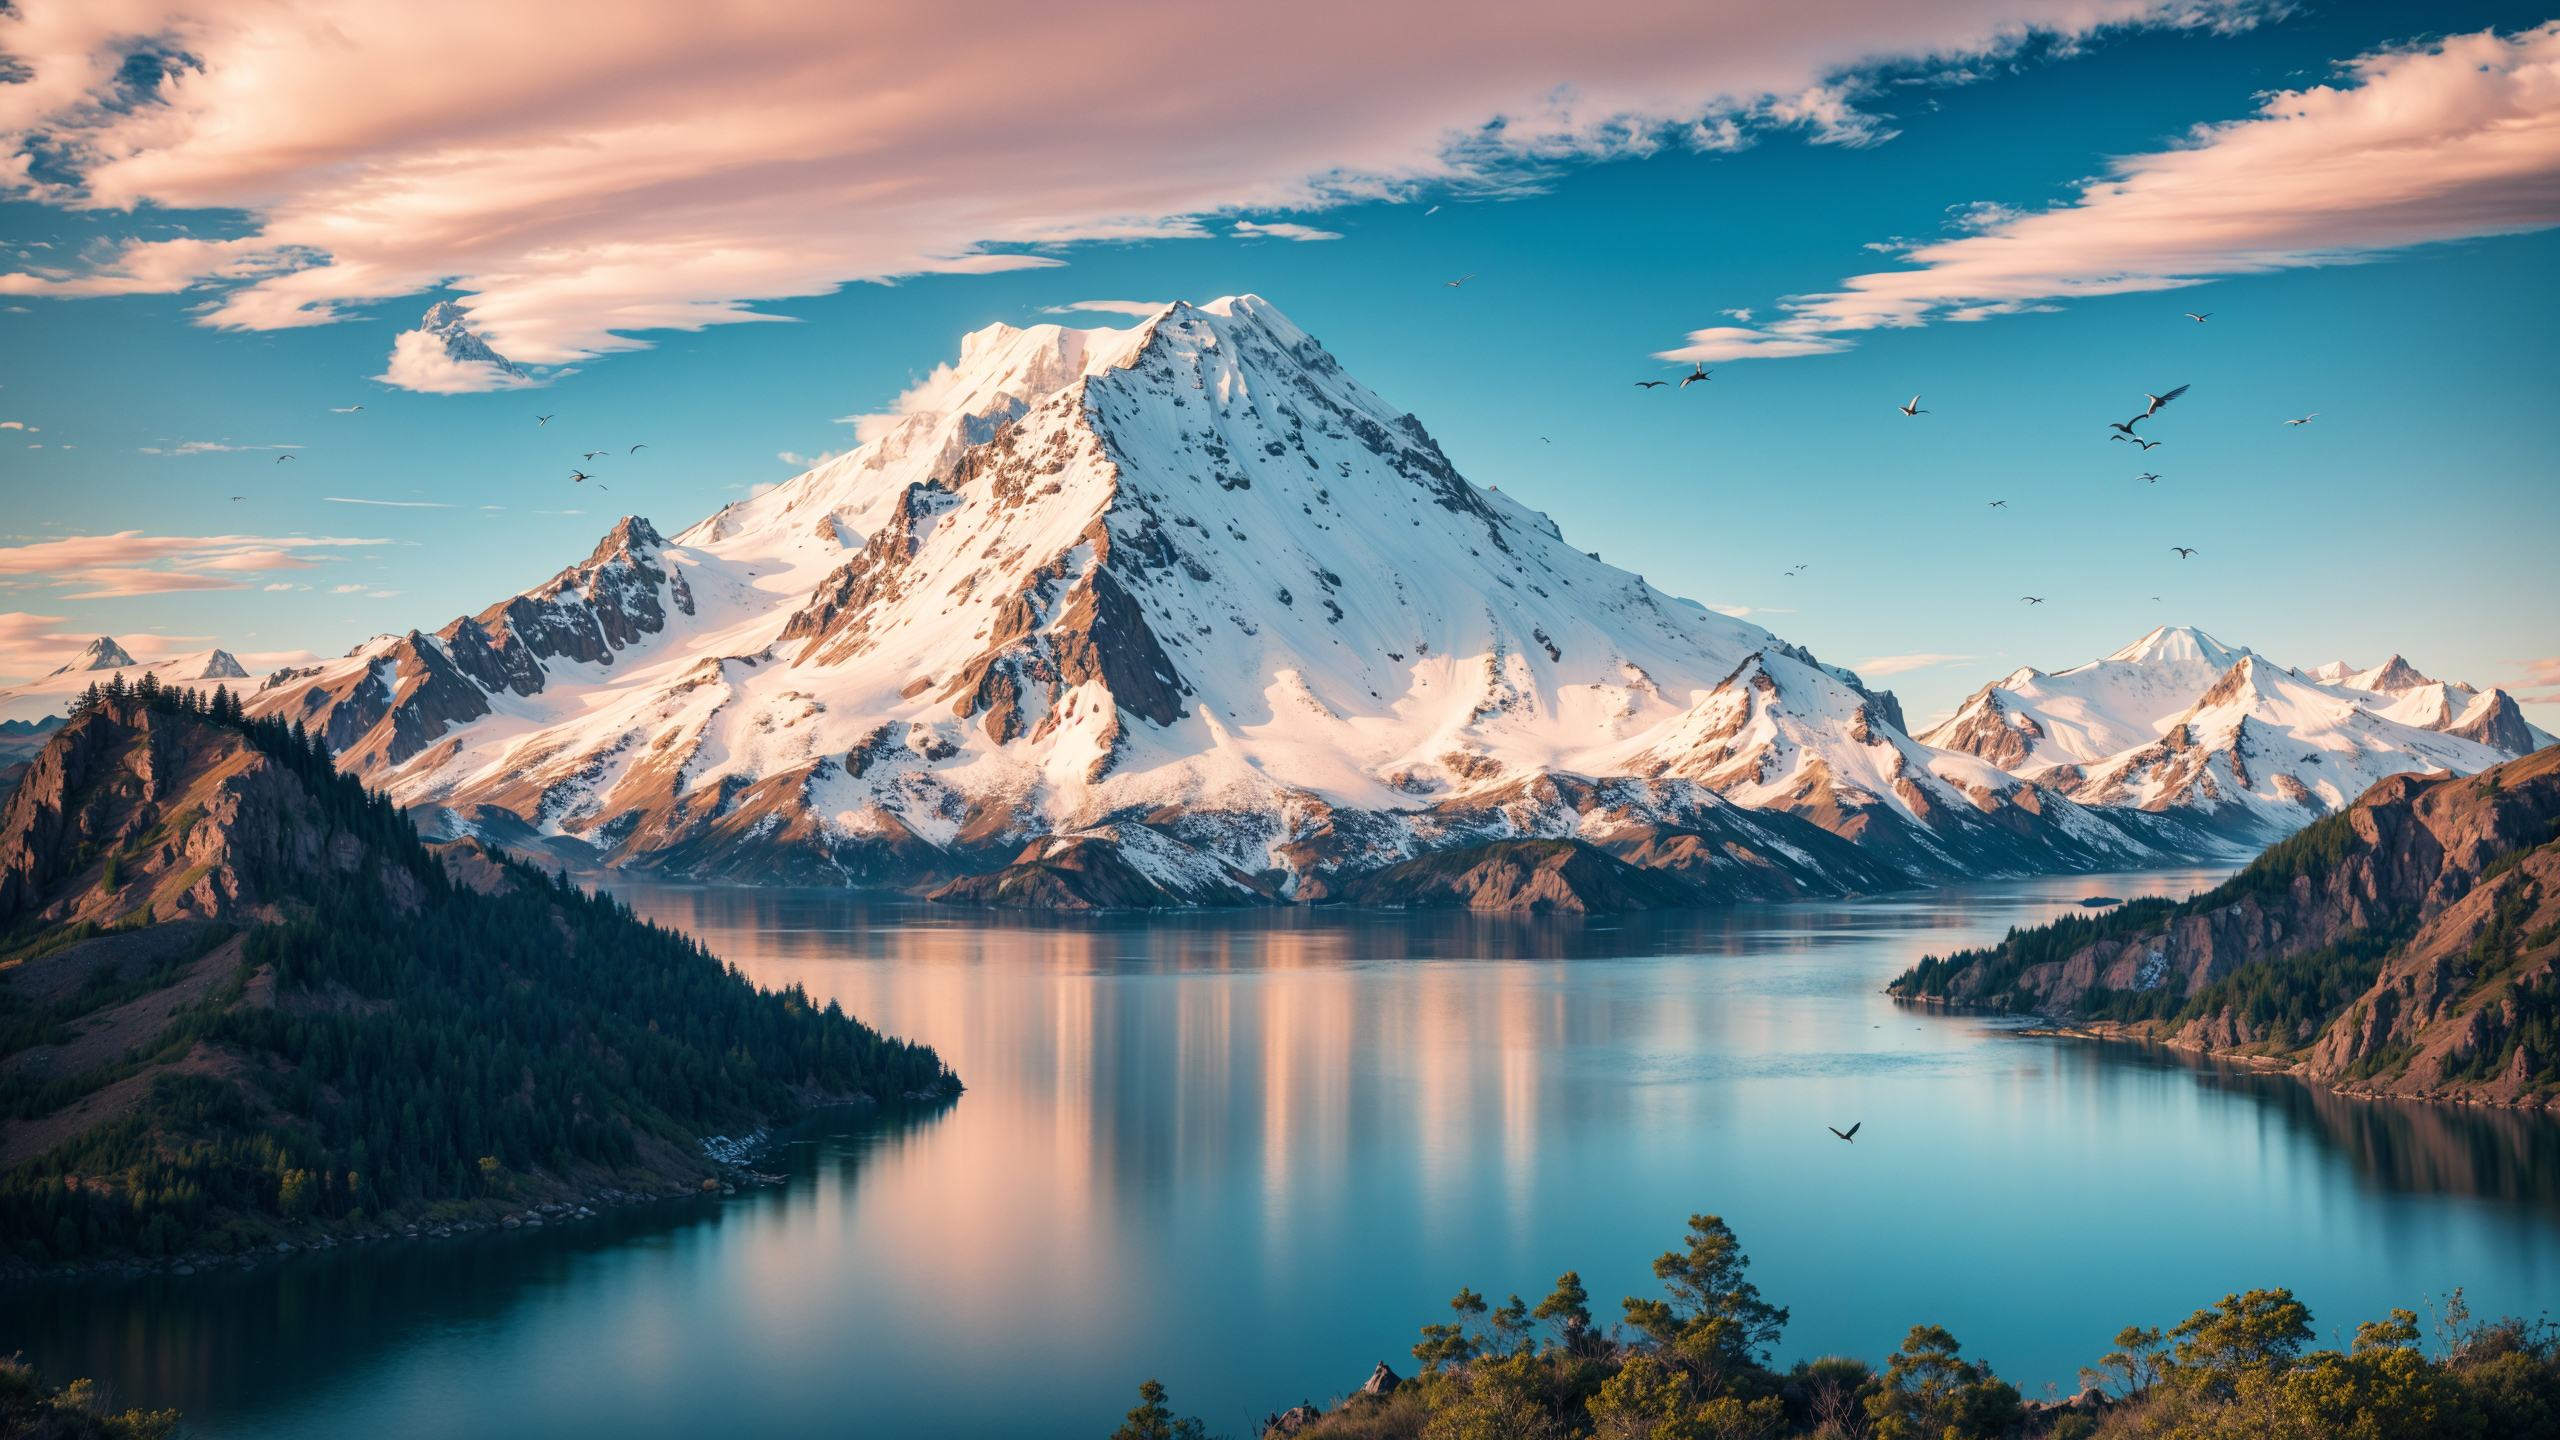 General 2560x1440 AI art landscape trees lake clouds mountains water sky environment sunrise snow reflection nature